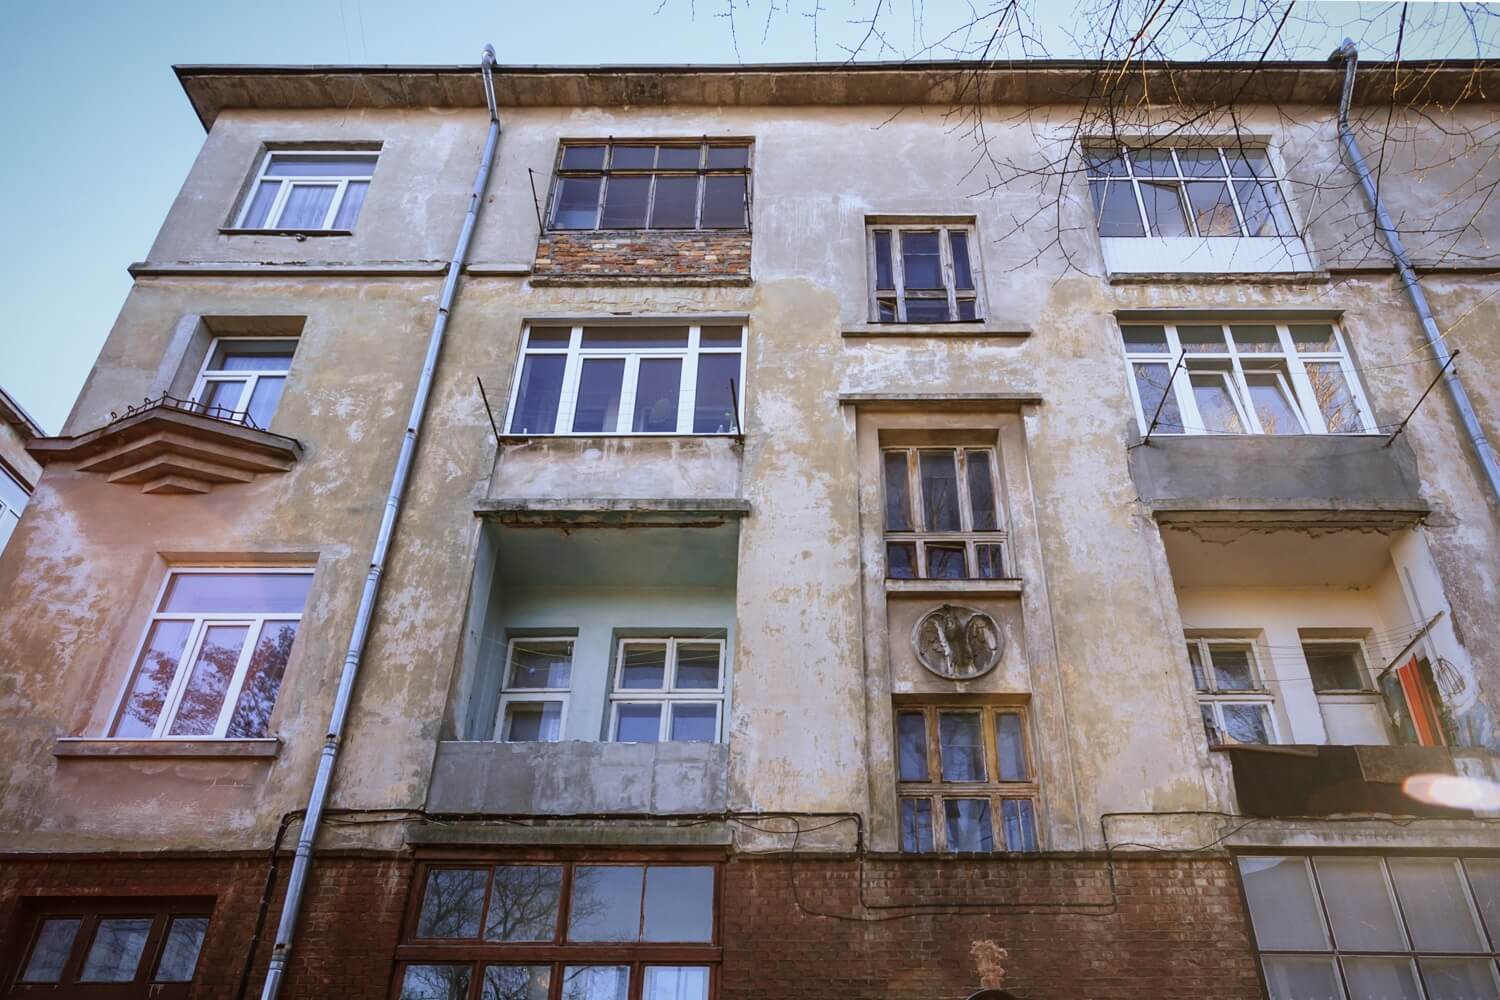 Vul. Promyslova, 31. Building constructed for tram depot workers. Northern facade/Photo courtesy of Nazarii Parkhomyk, 2015